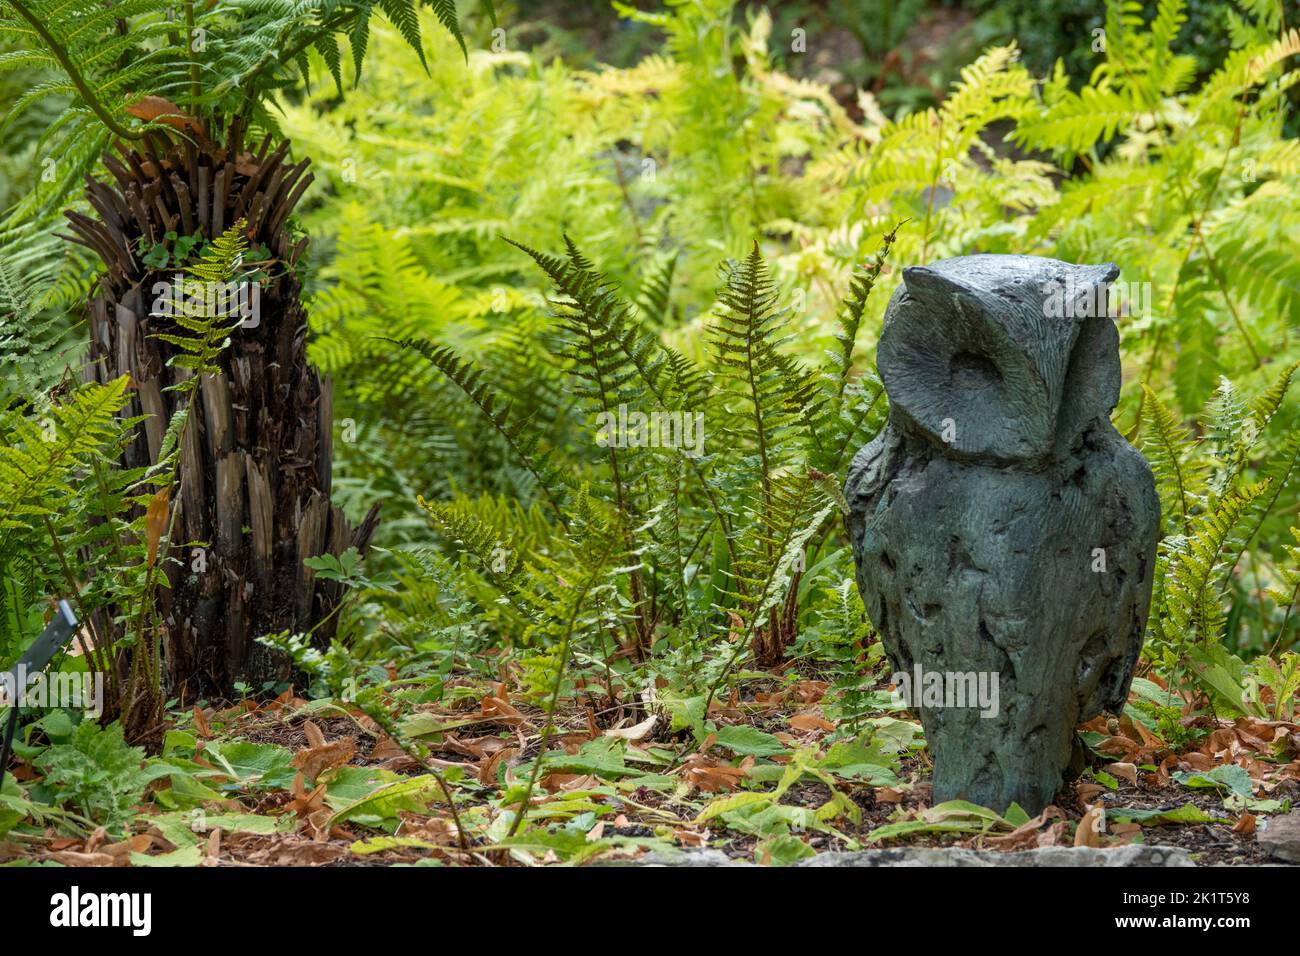 owl sculpture in amongst bright green fern fronds Stock Photo